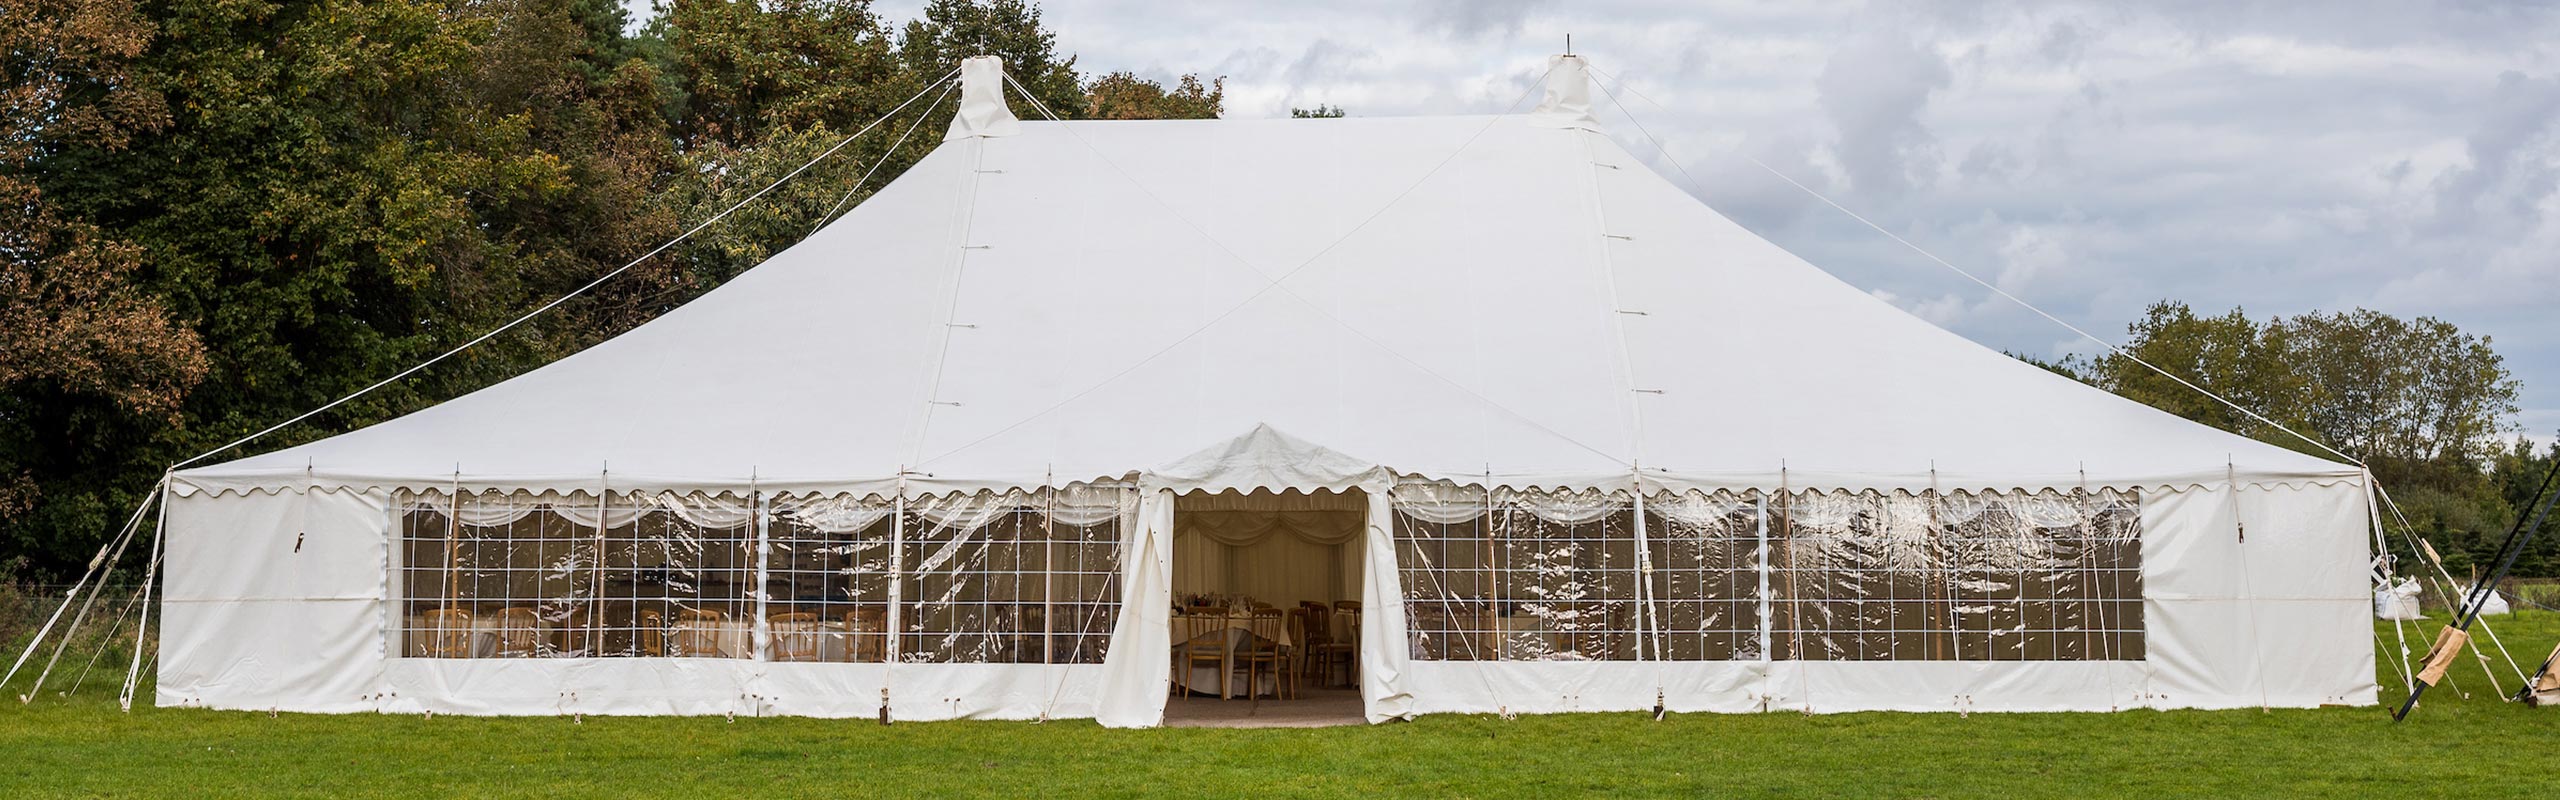 Events Marquee For Sale Norfolk